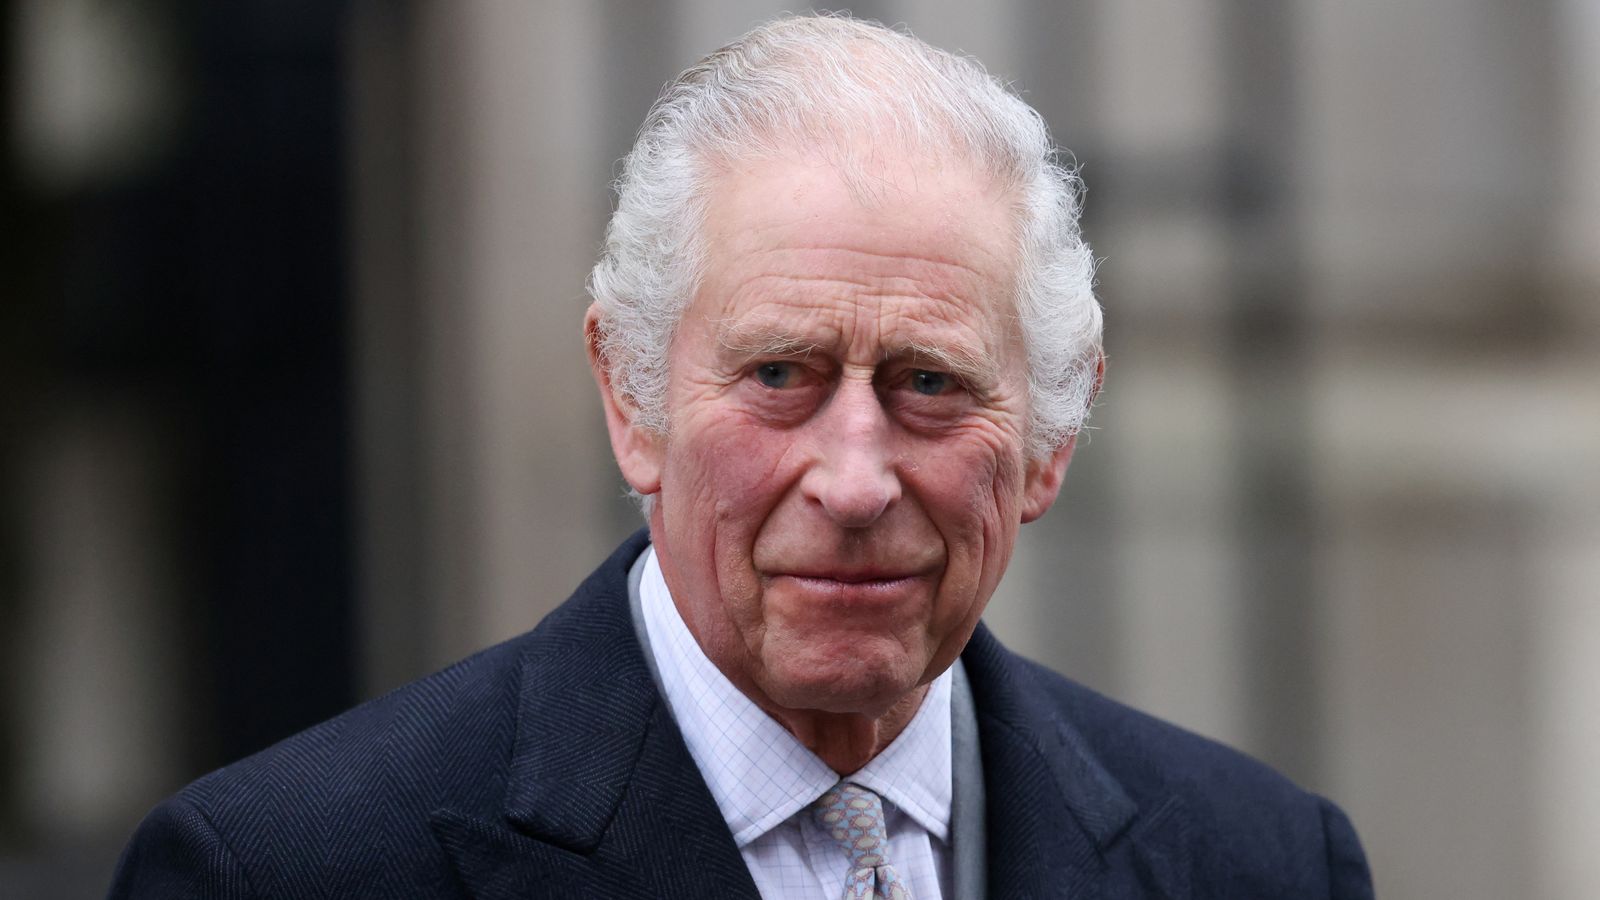 King Charles's cancer diagnosis: What we know so far